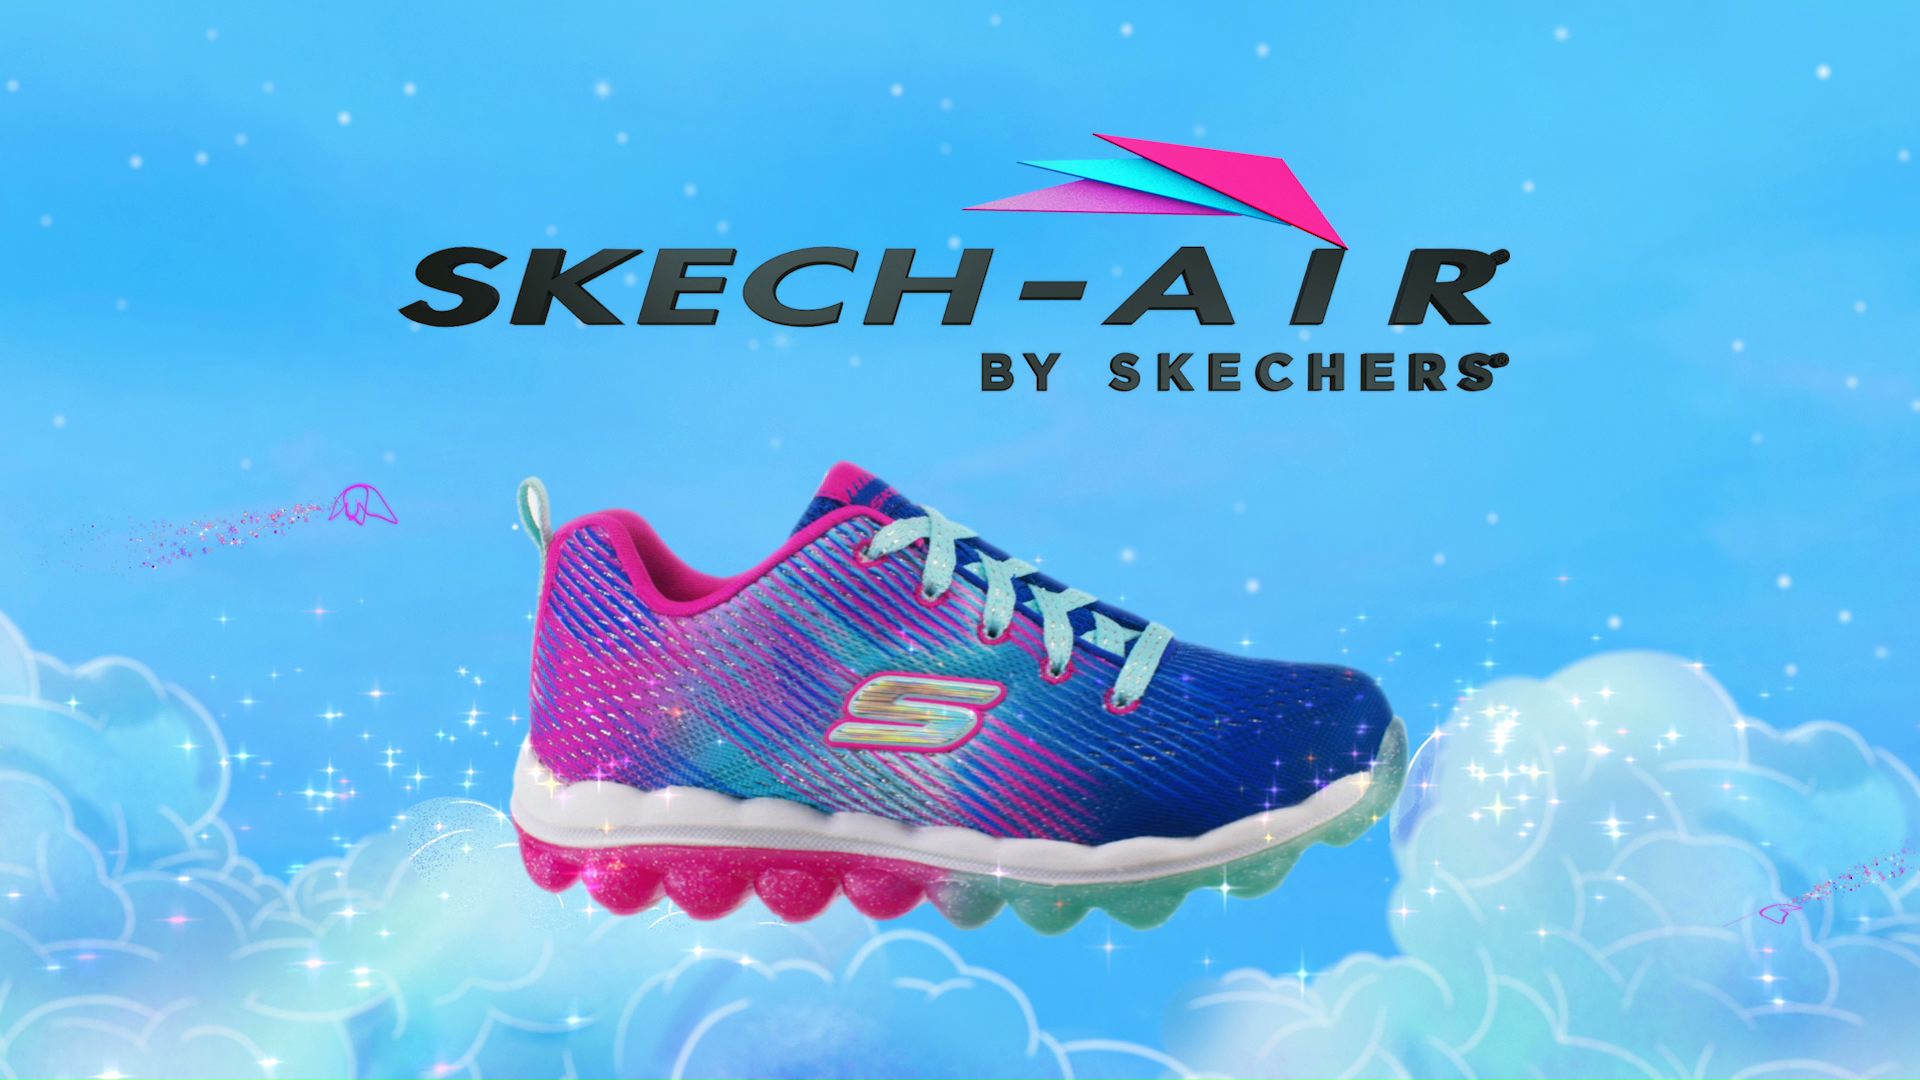 skechers running shoes commercial